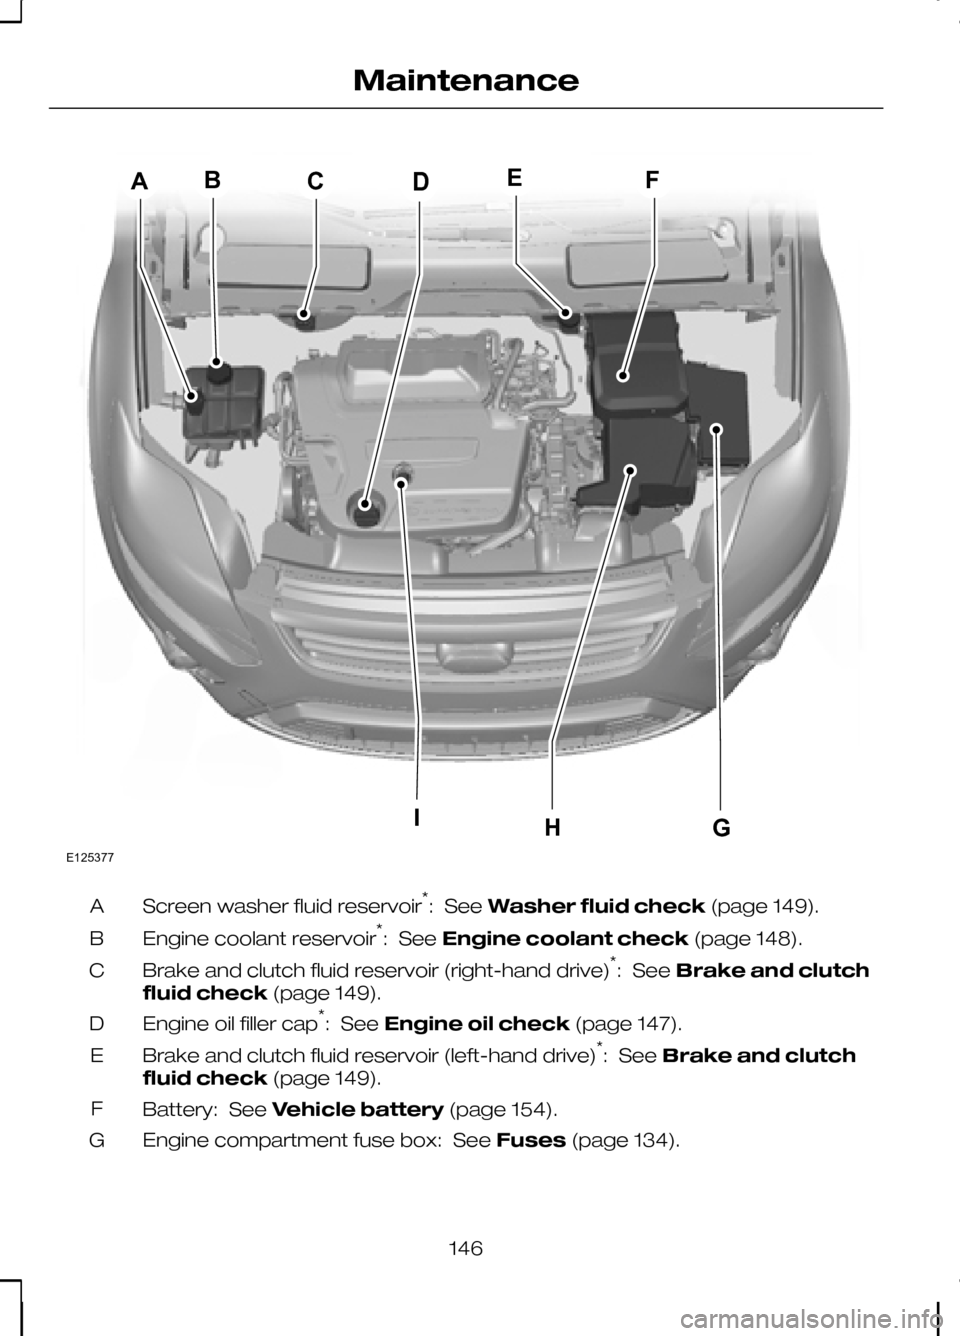 FORD KUGA 2010 1.G Owners Manual Screen washer fluid reservoir
*
: See Washer fluid check (page 149).
A
Engine coolant reservoir *
: See Engine coolant check (page 148).
B
Brake and clutch fluid reservoir (right-hand drive) *
: See B